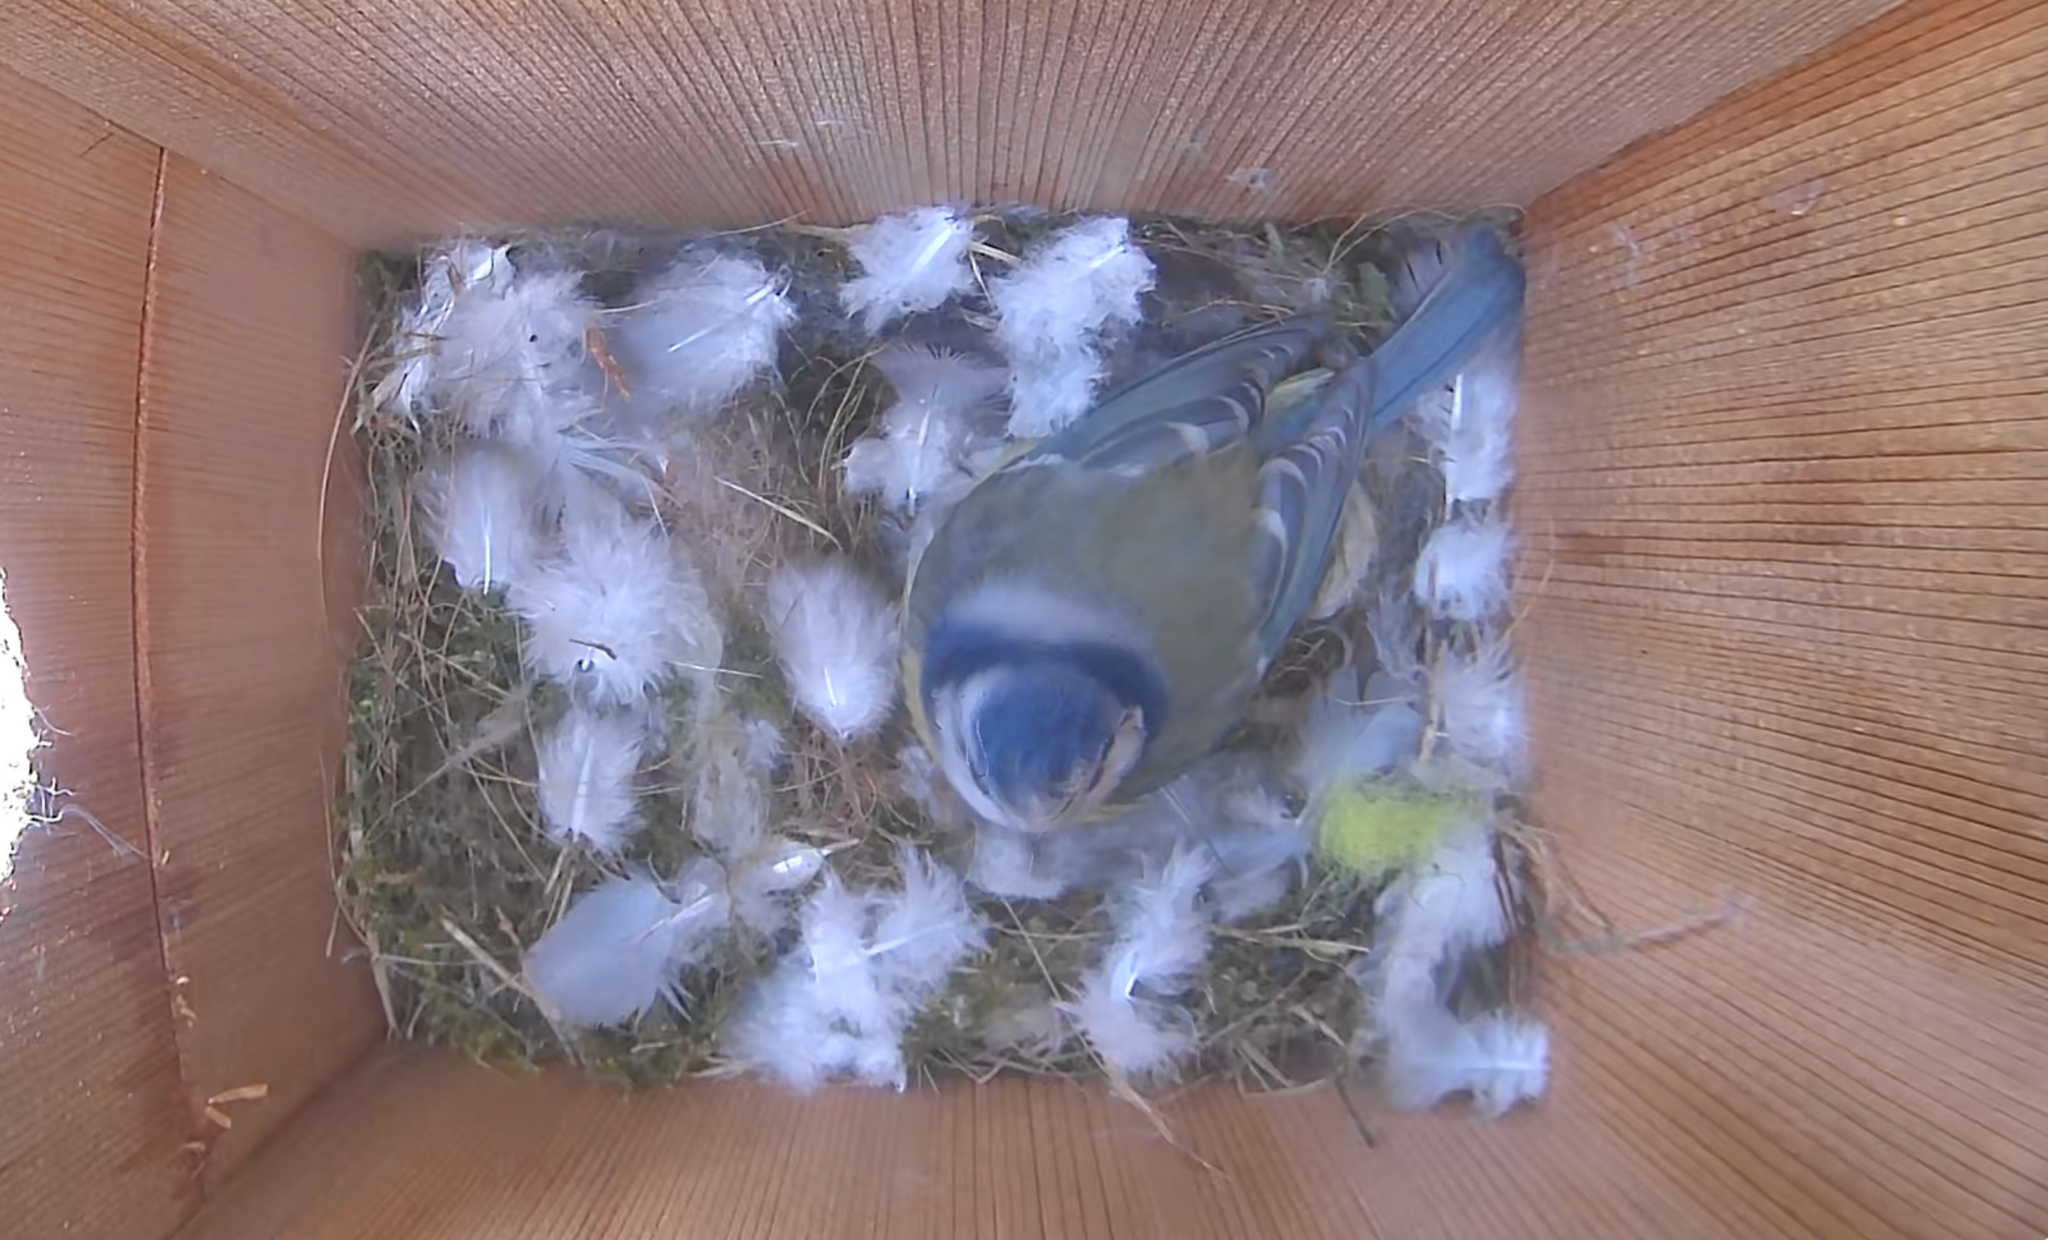 Hatching Time Nestera. Screenshot can be seen of video that was taken of interior of bird house. There is a bird and feathers inside of the bird house.